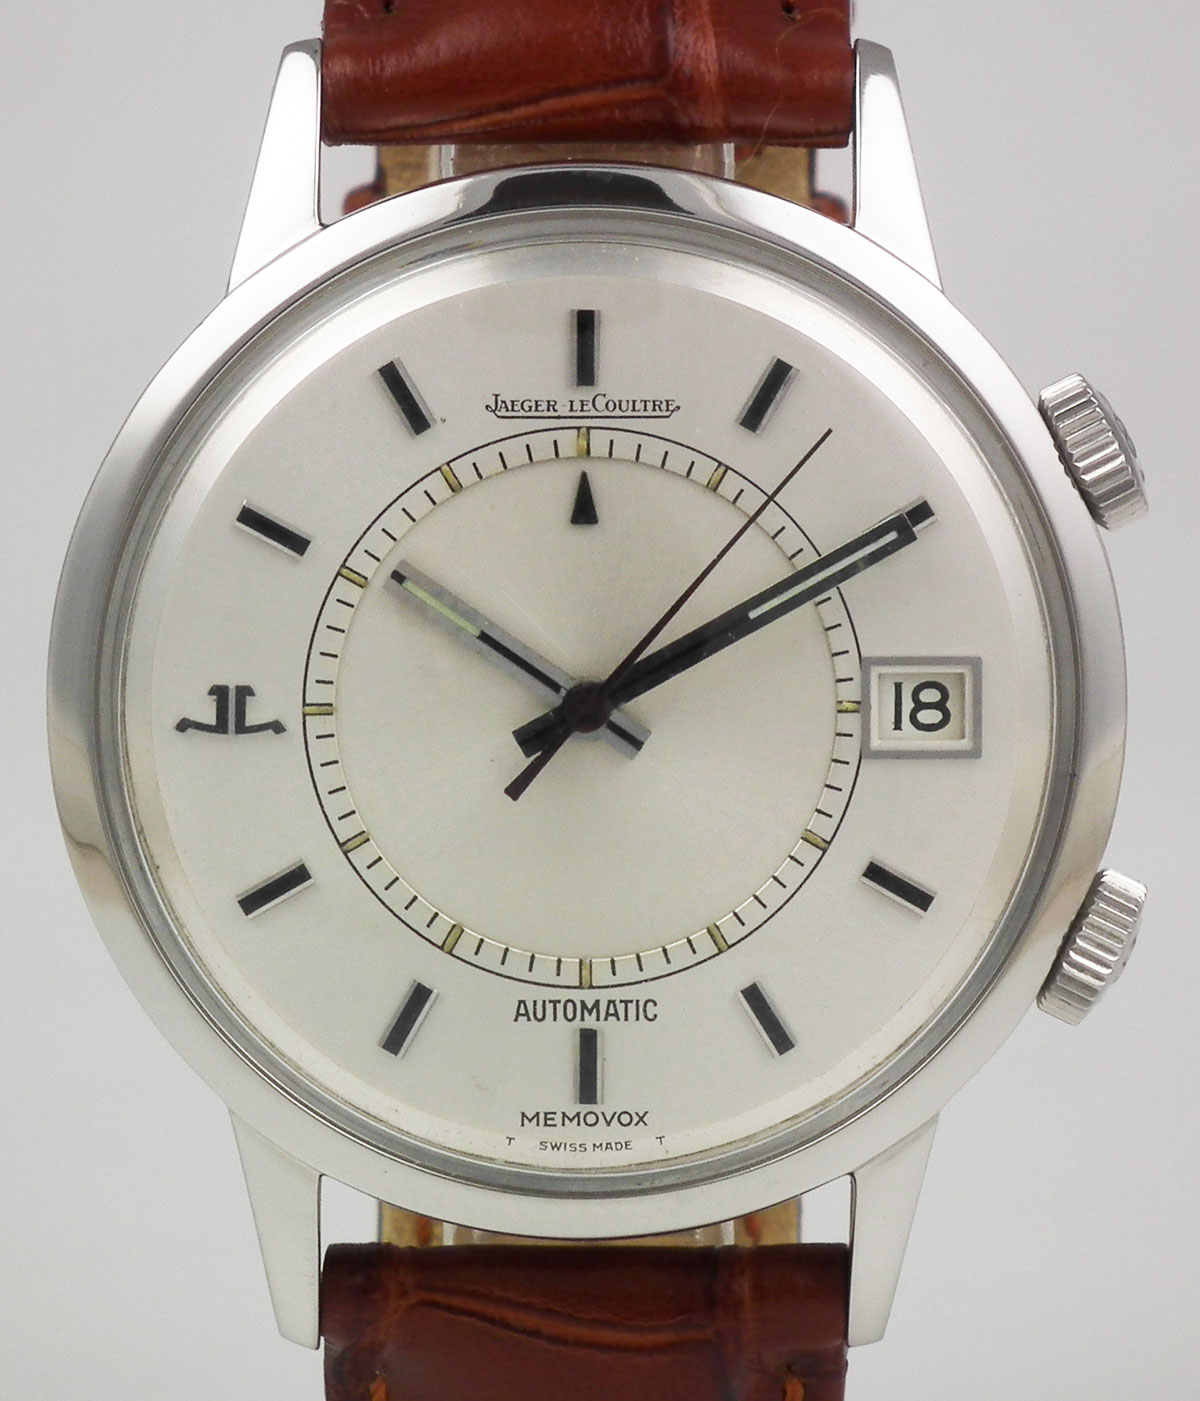 Jaeger LeCoultre Memovox Auto Date With Original Silver Dial (1961)